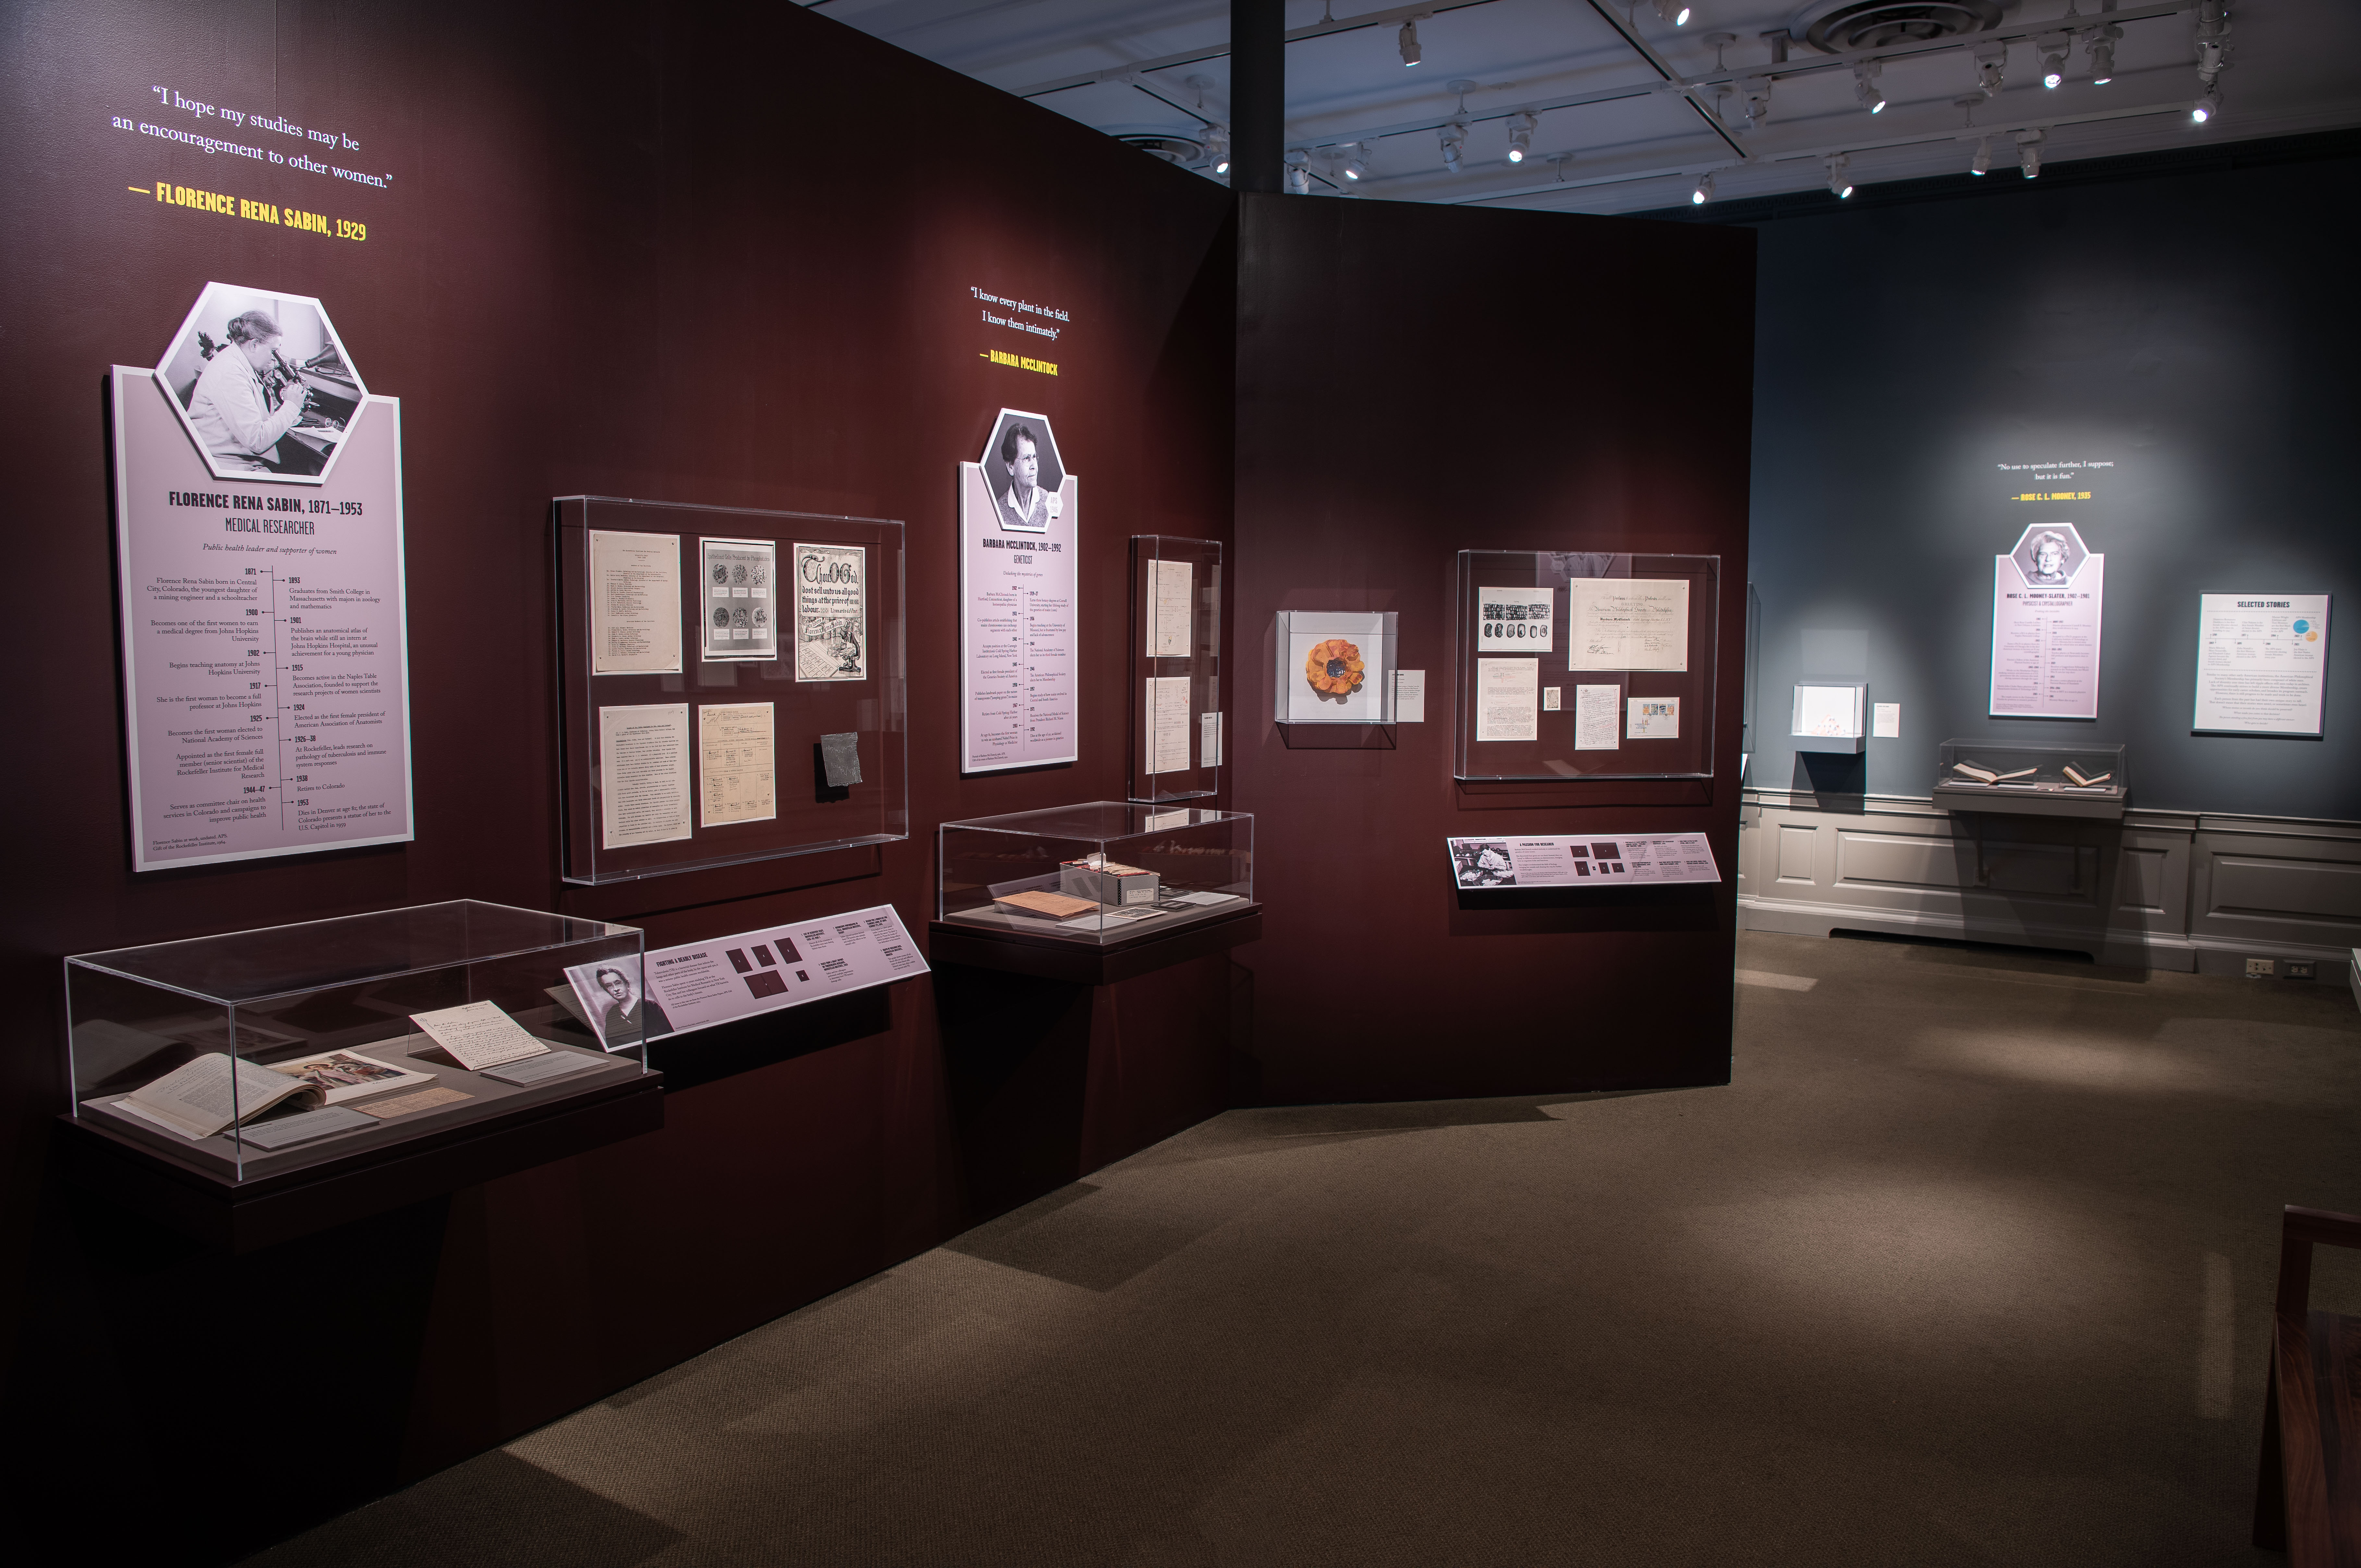 view of the exhibition